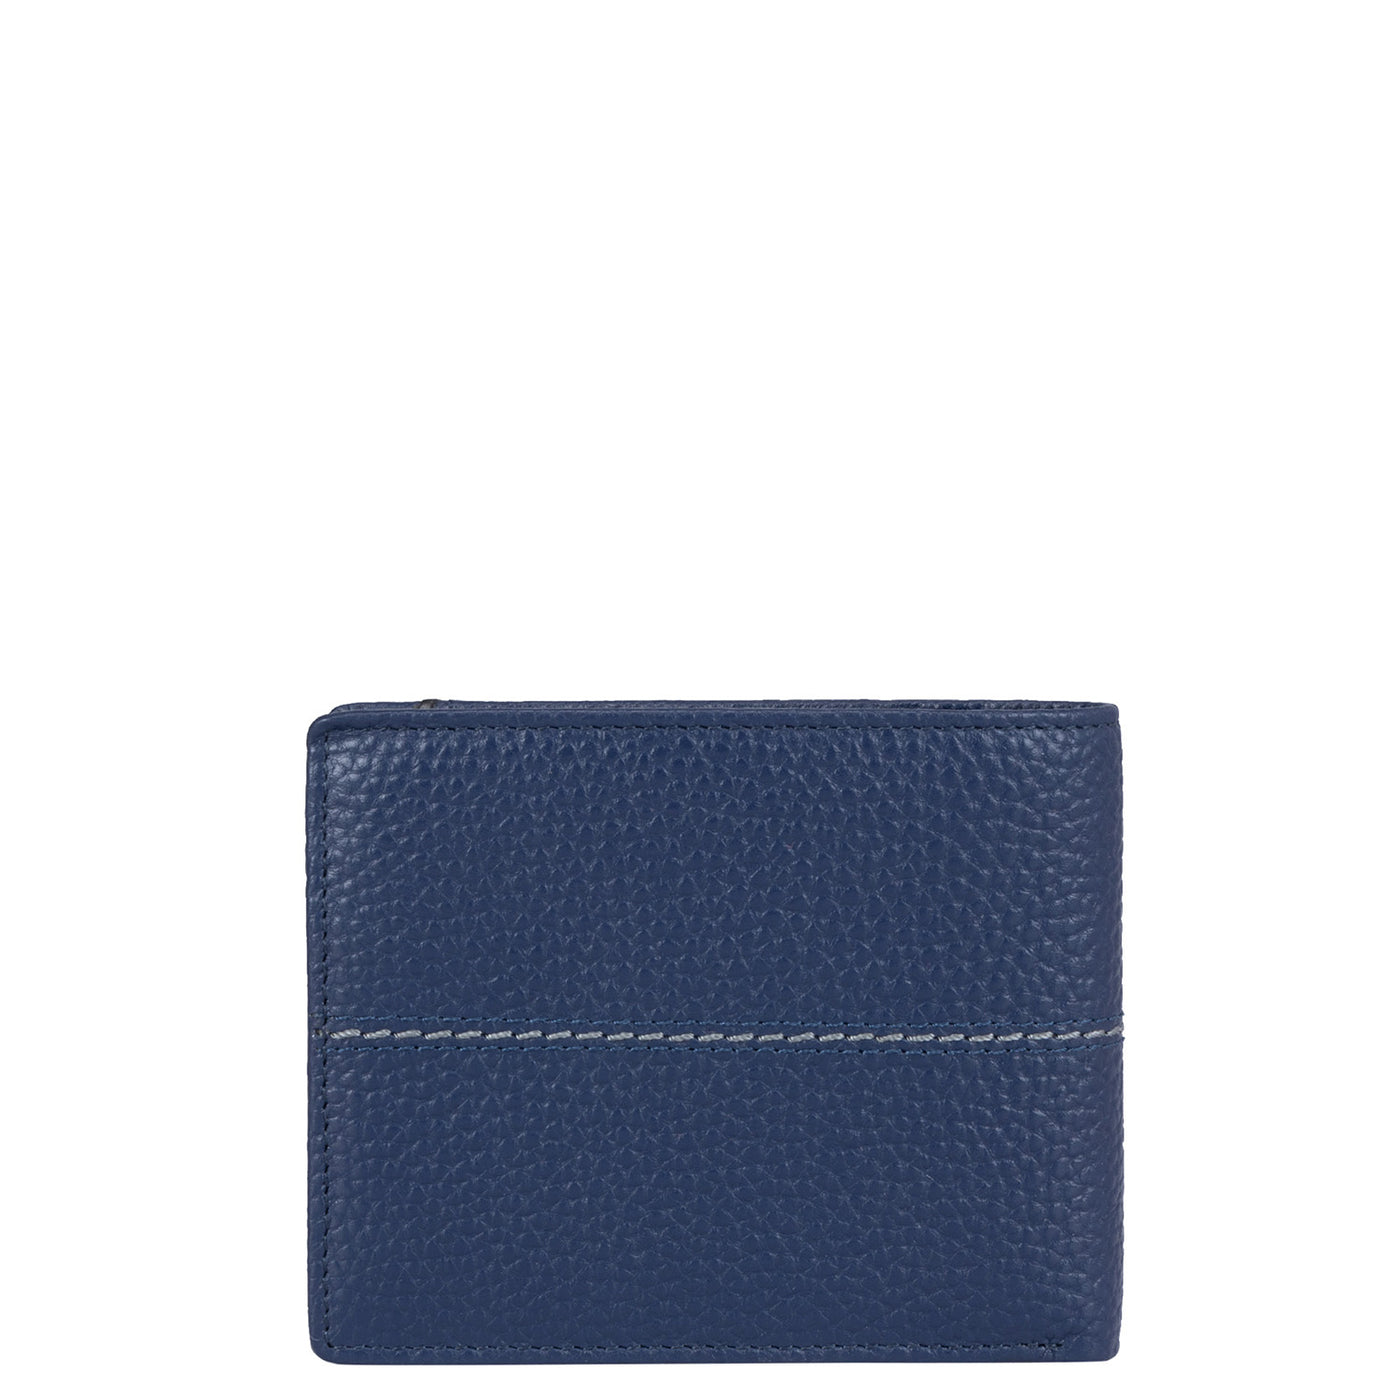 Wax Leather Mens Wallet - Patriot Blue